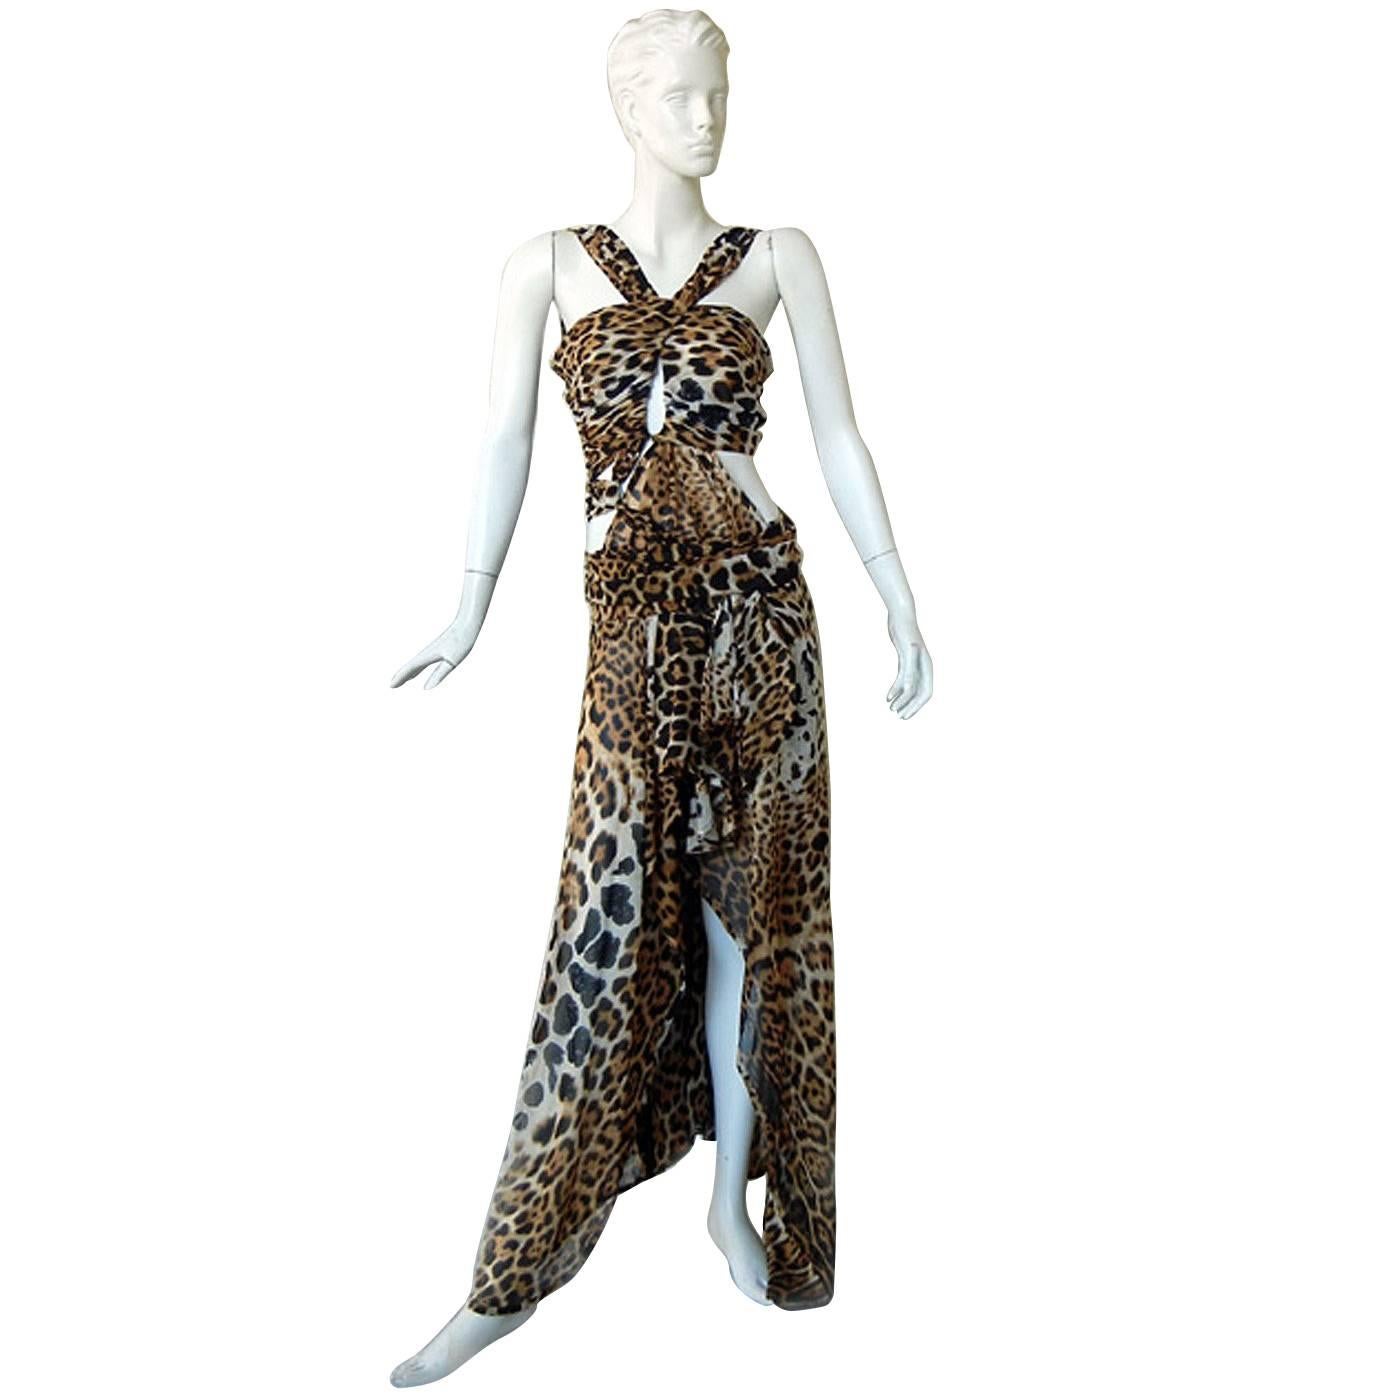  Tom Ford for Saint Laurent 2002 Leopard Cut-Out Wrap Silk Dress  Most Wanted!